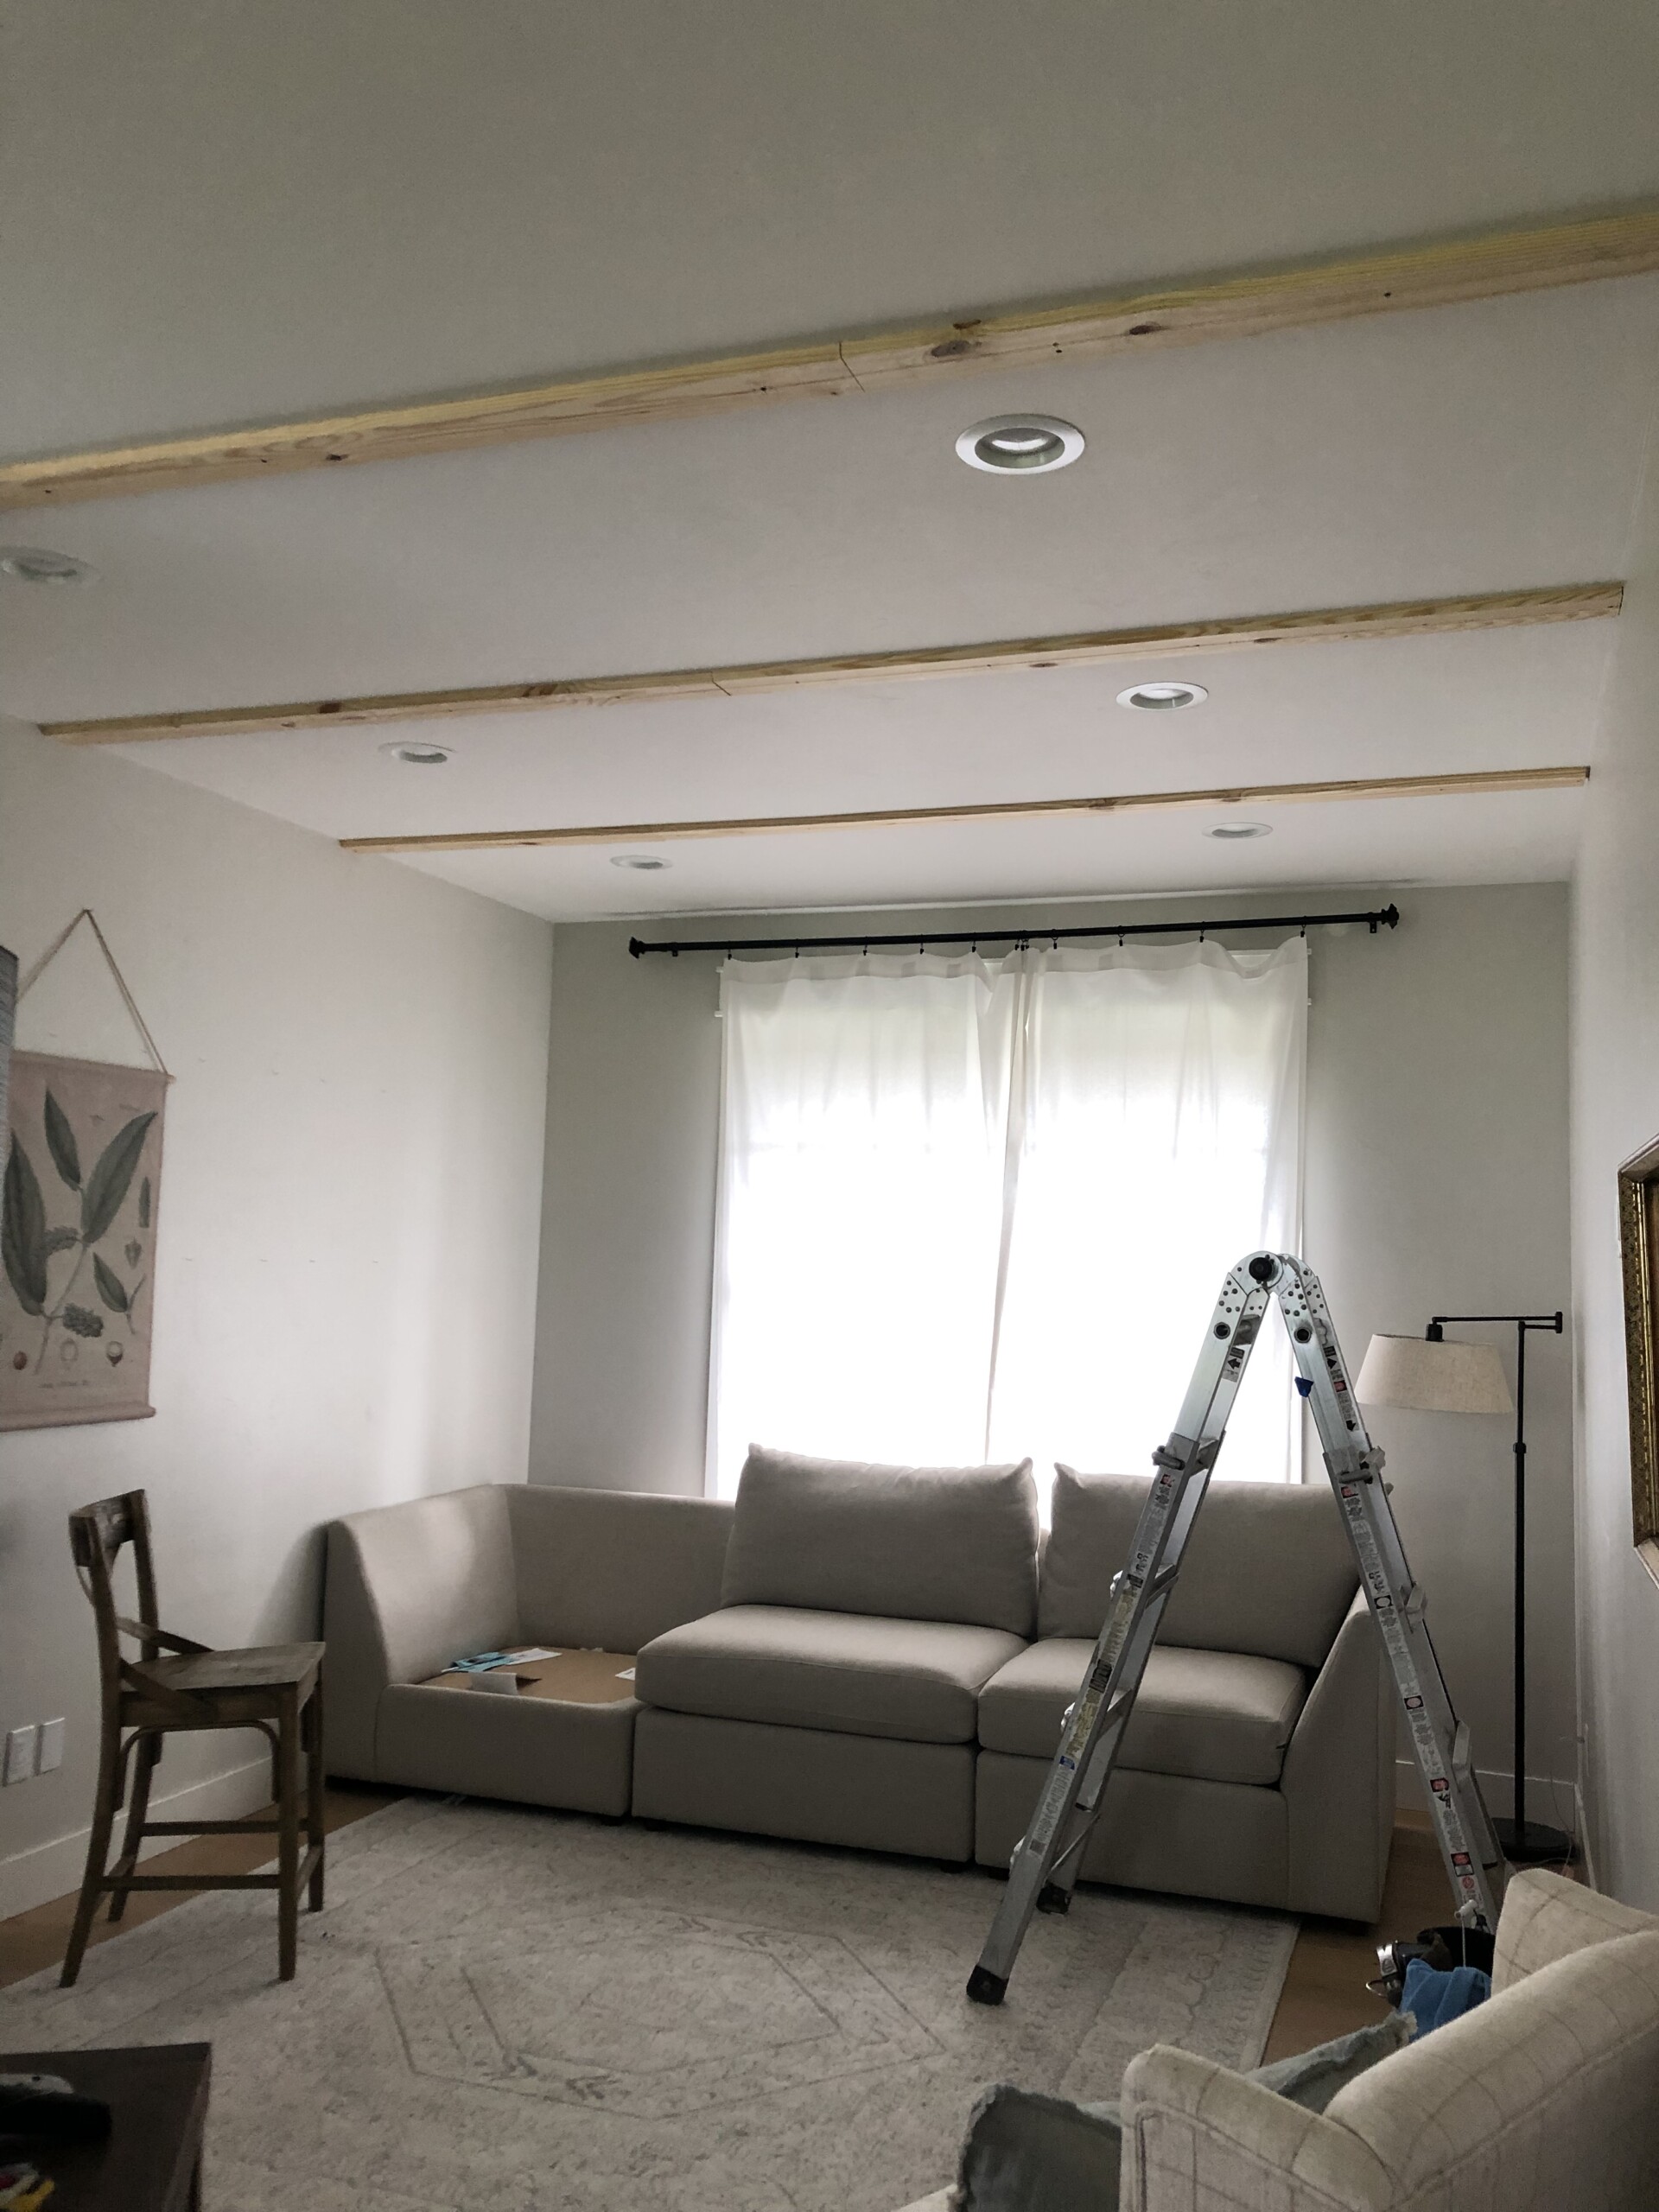 Adding Rustic Faux Beams in the Living Room